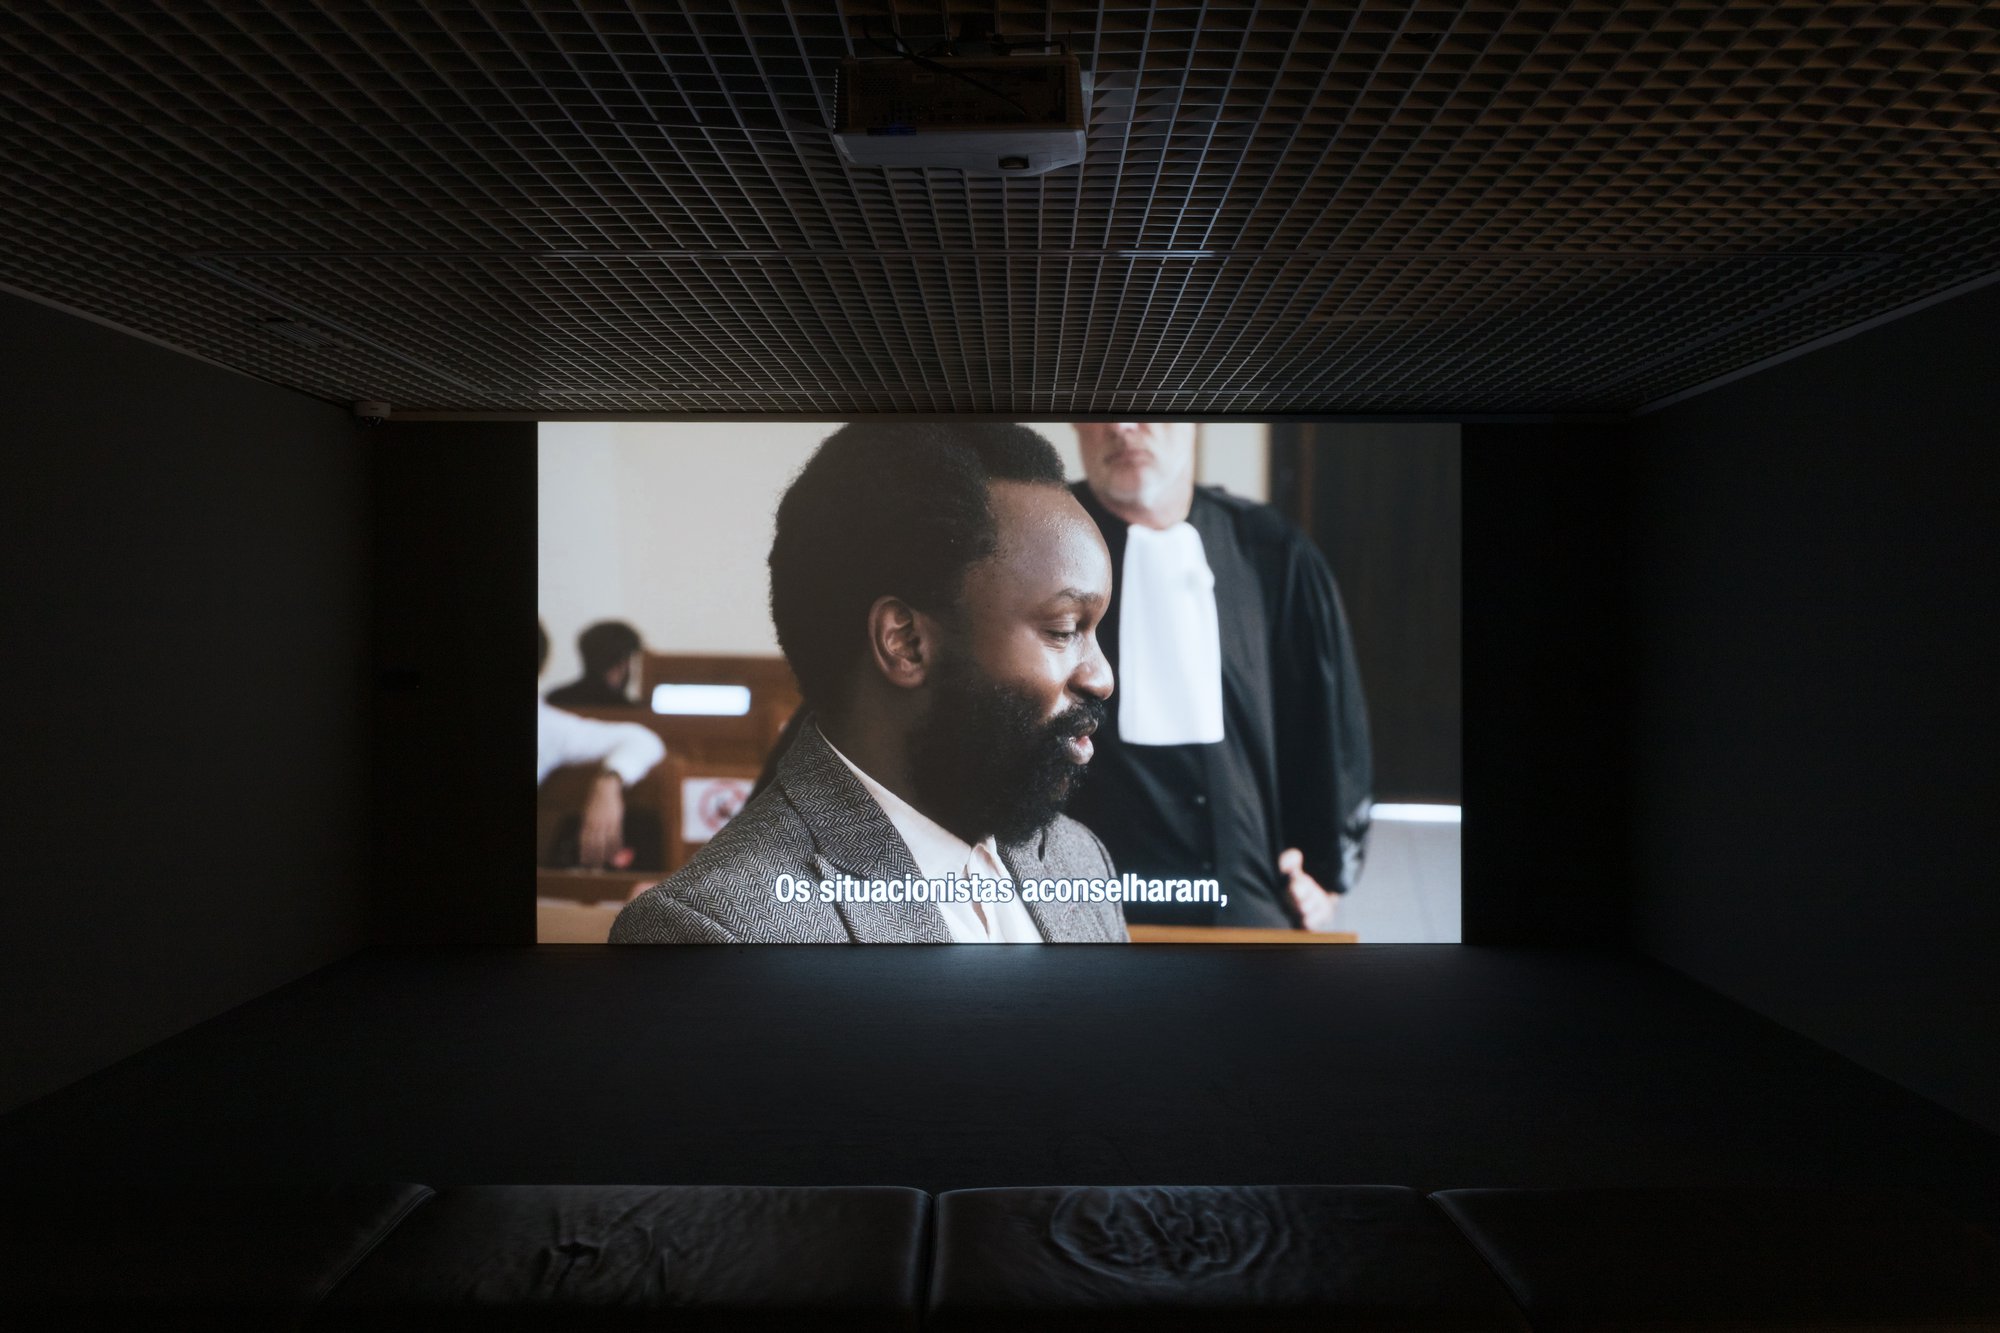 Views of the exhibition Fracture Empire by Samson Kambalu at Culturgest, Lisbon. Photos by António Jorge Silva.